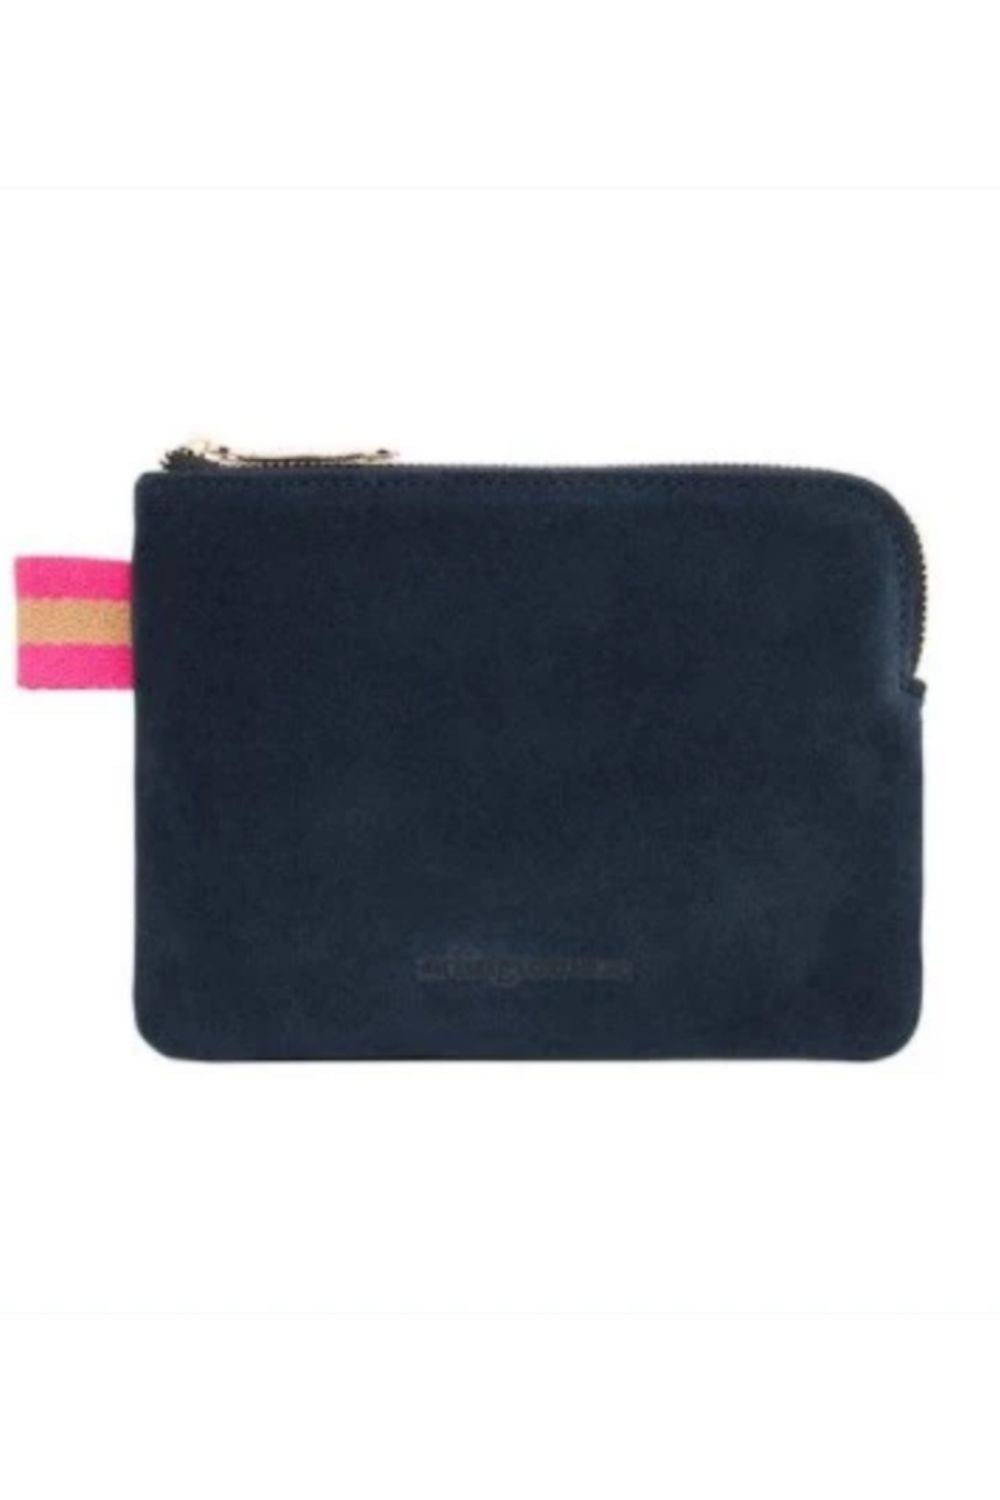 PAIGE COIN PURSE - NAVY SUEDE